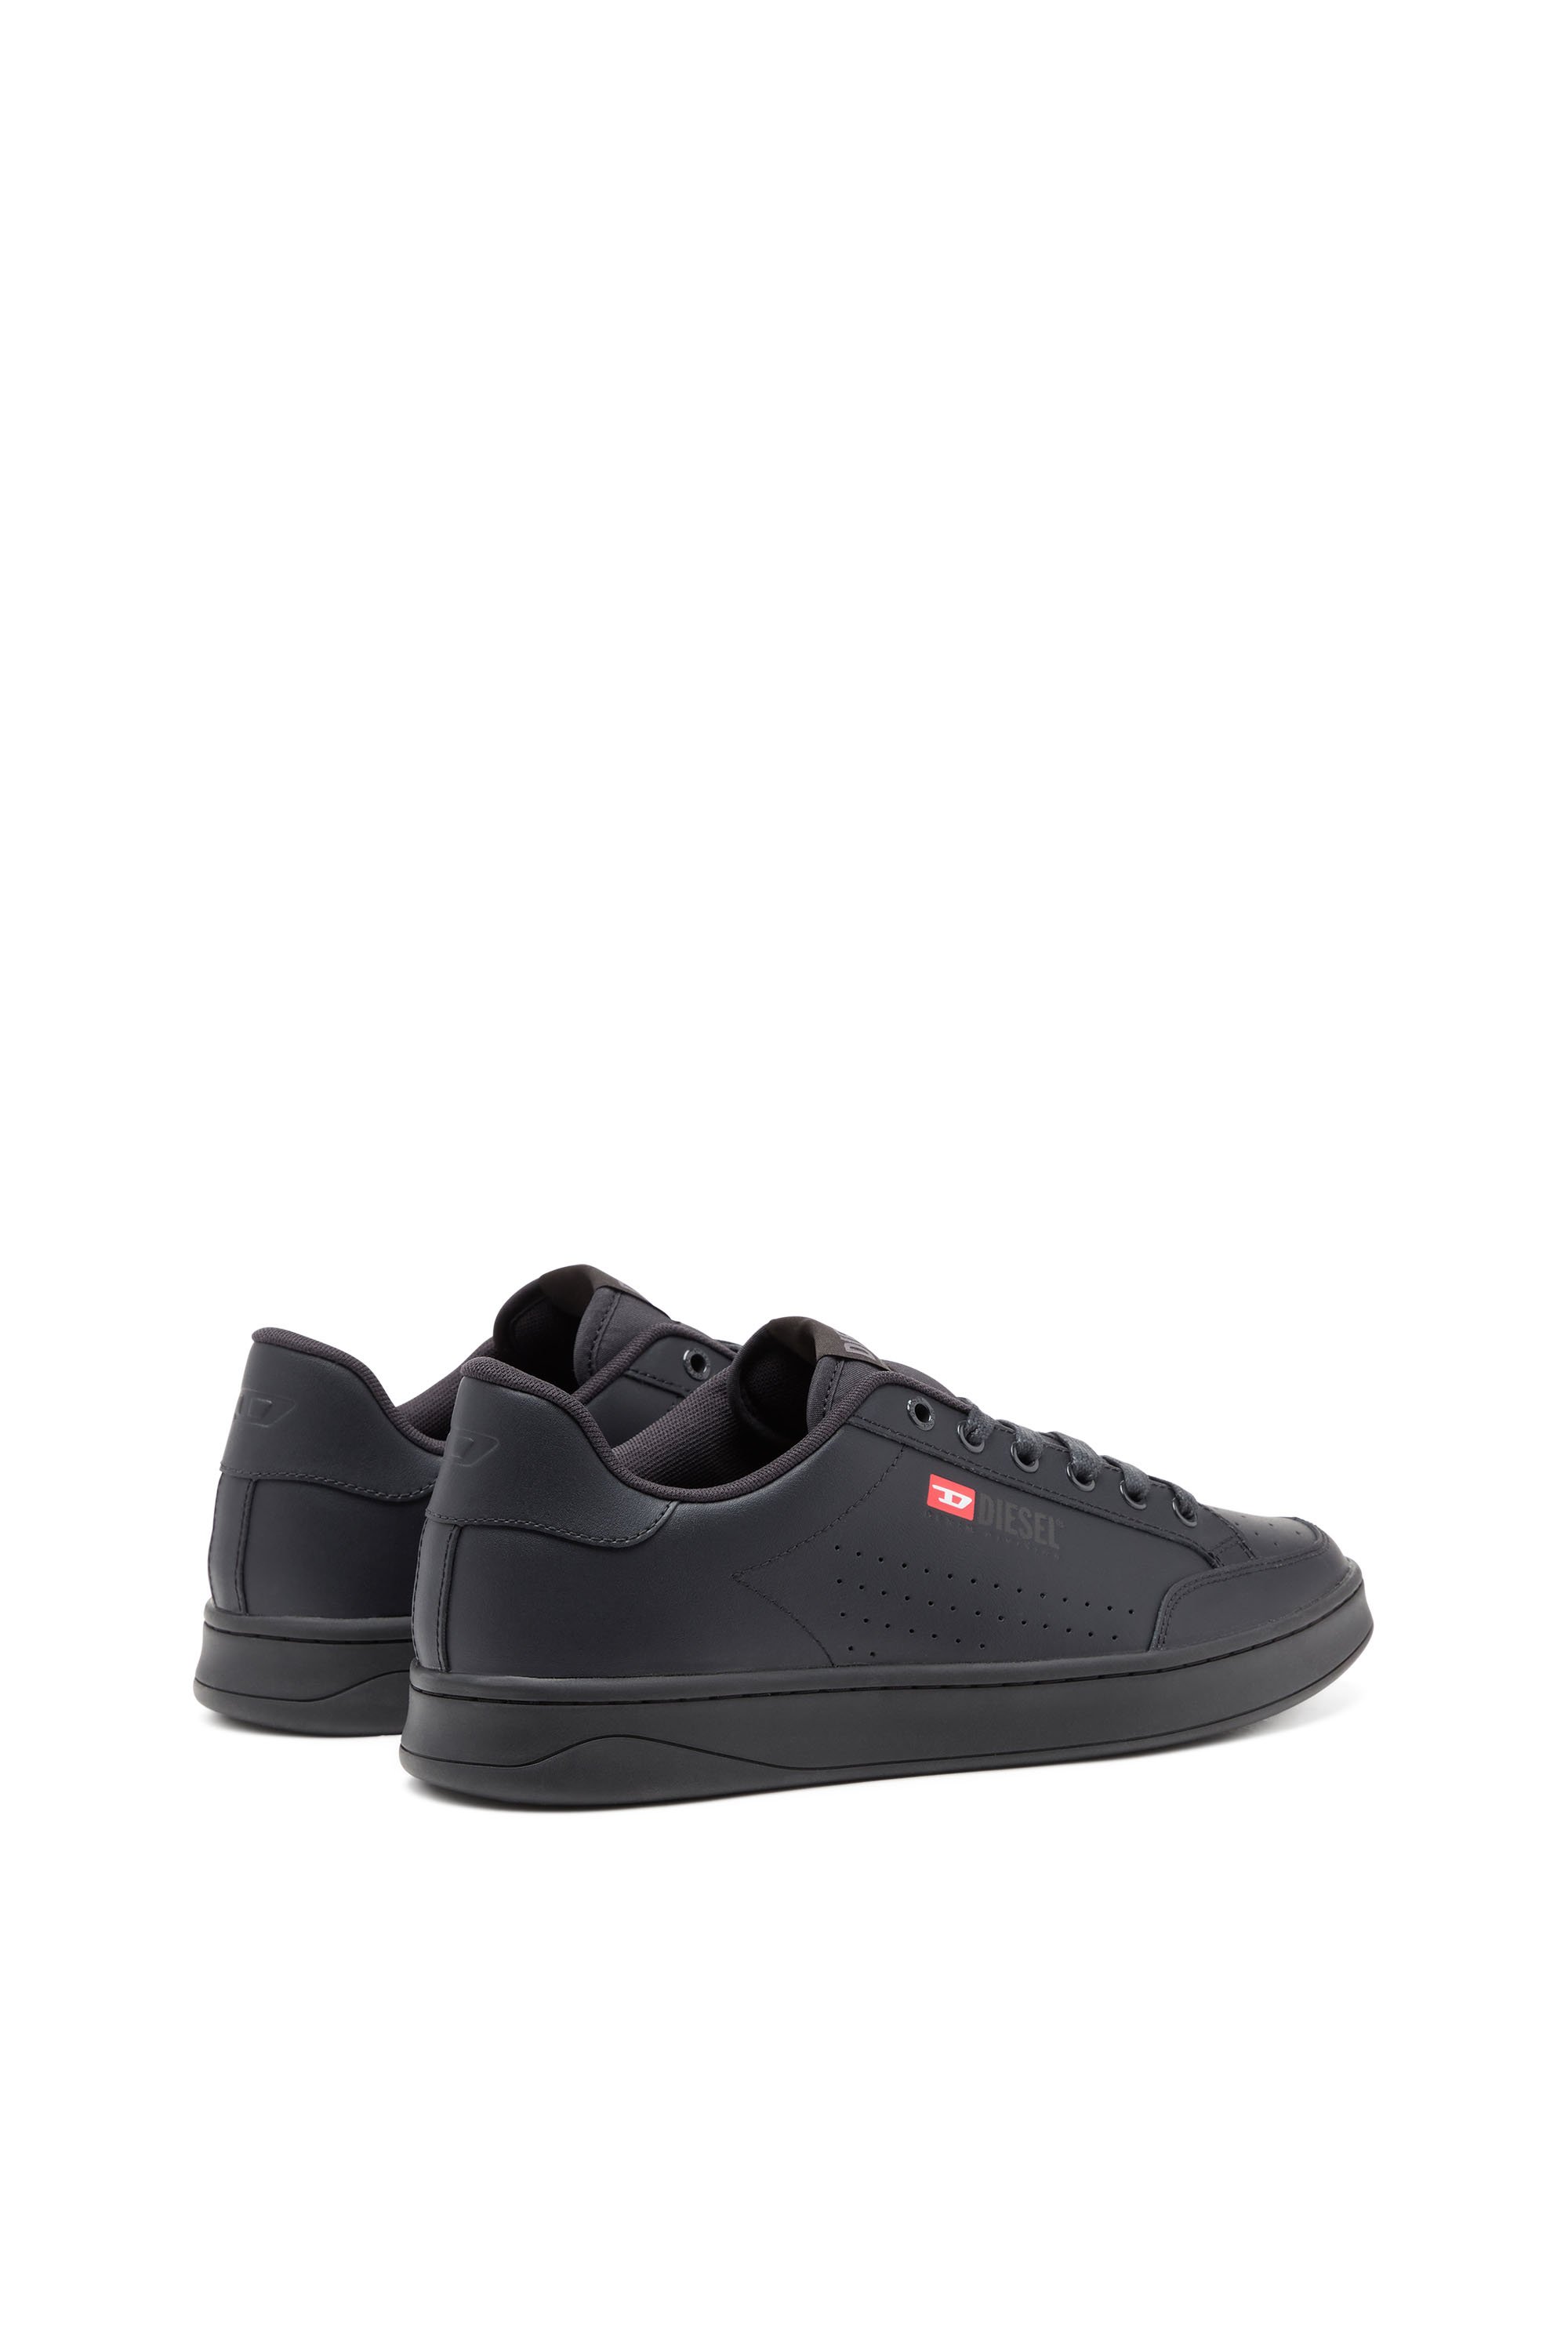 Diesel - S-ATHENE VTG, Man S-Athene-Low-top sneakers in leather and nylon in Black - Image 3